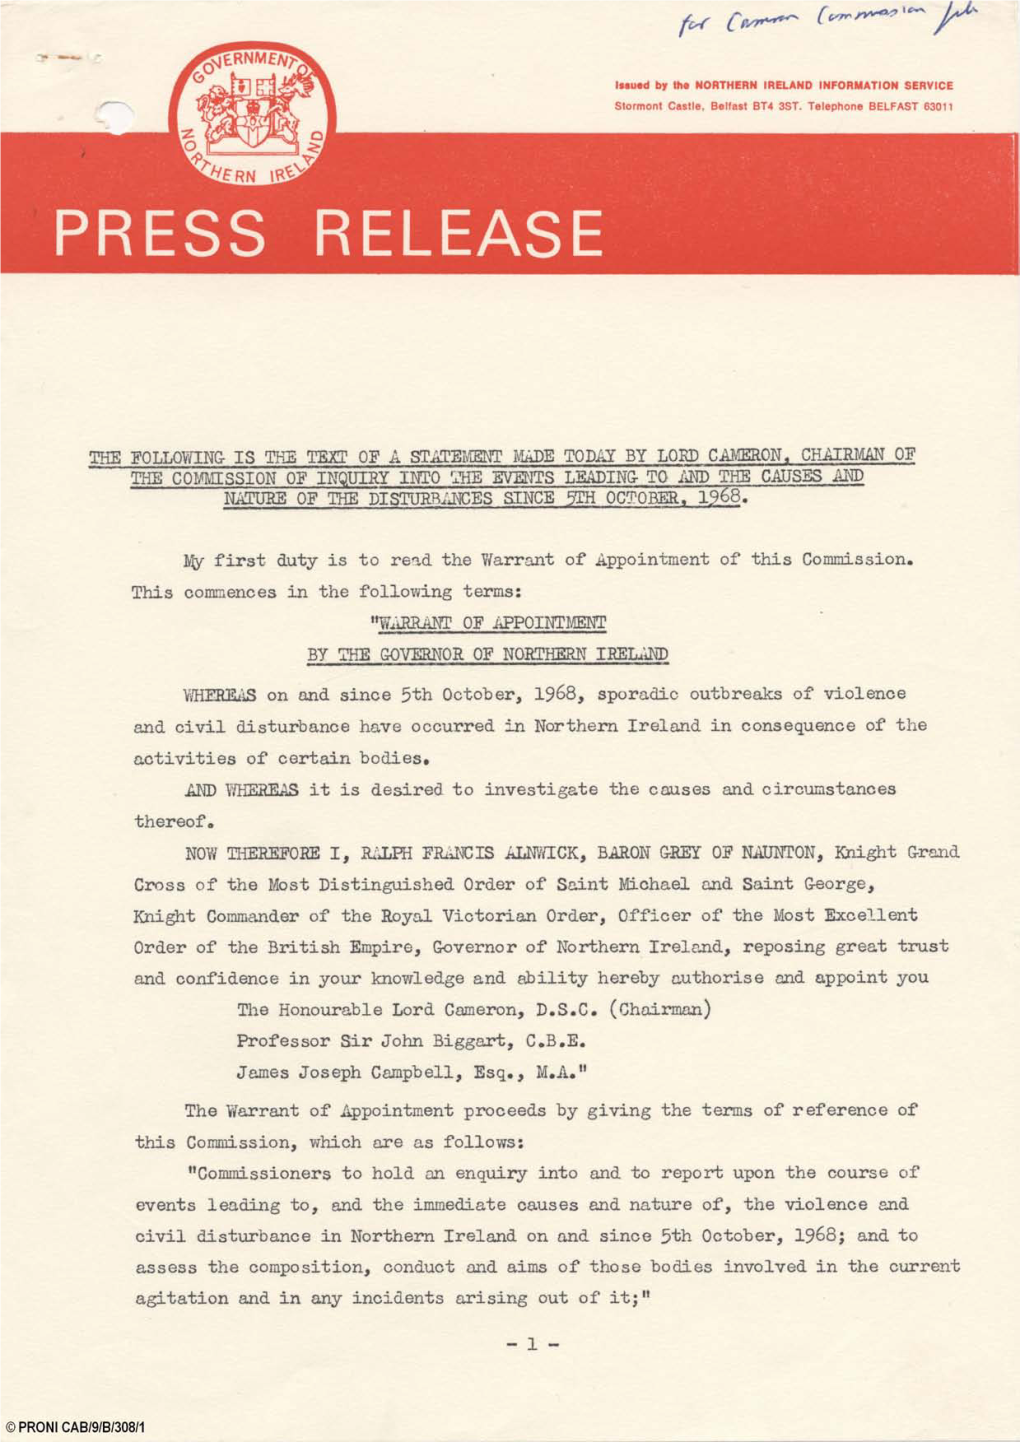 (1 April 1969), Statement by Lord Cameron, Chairman of The